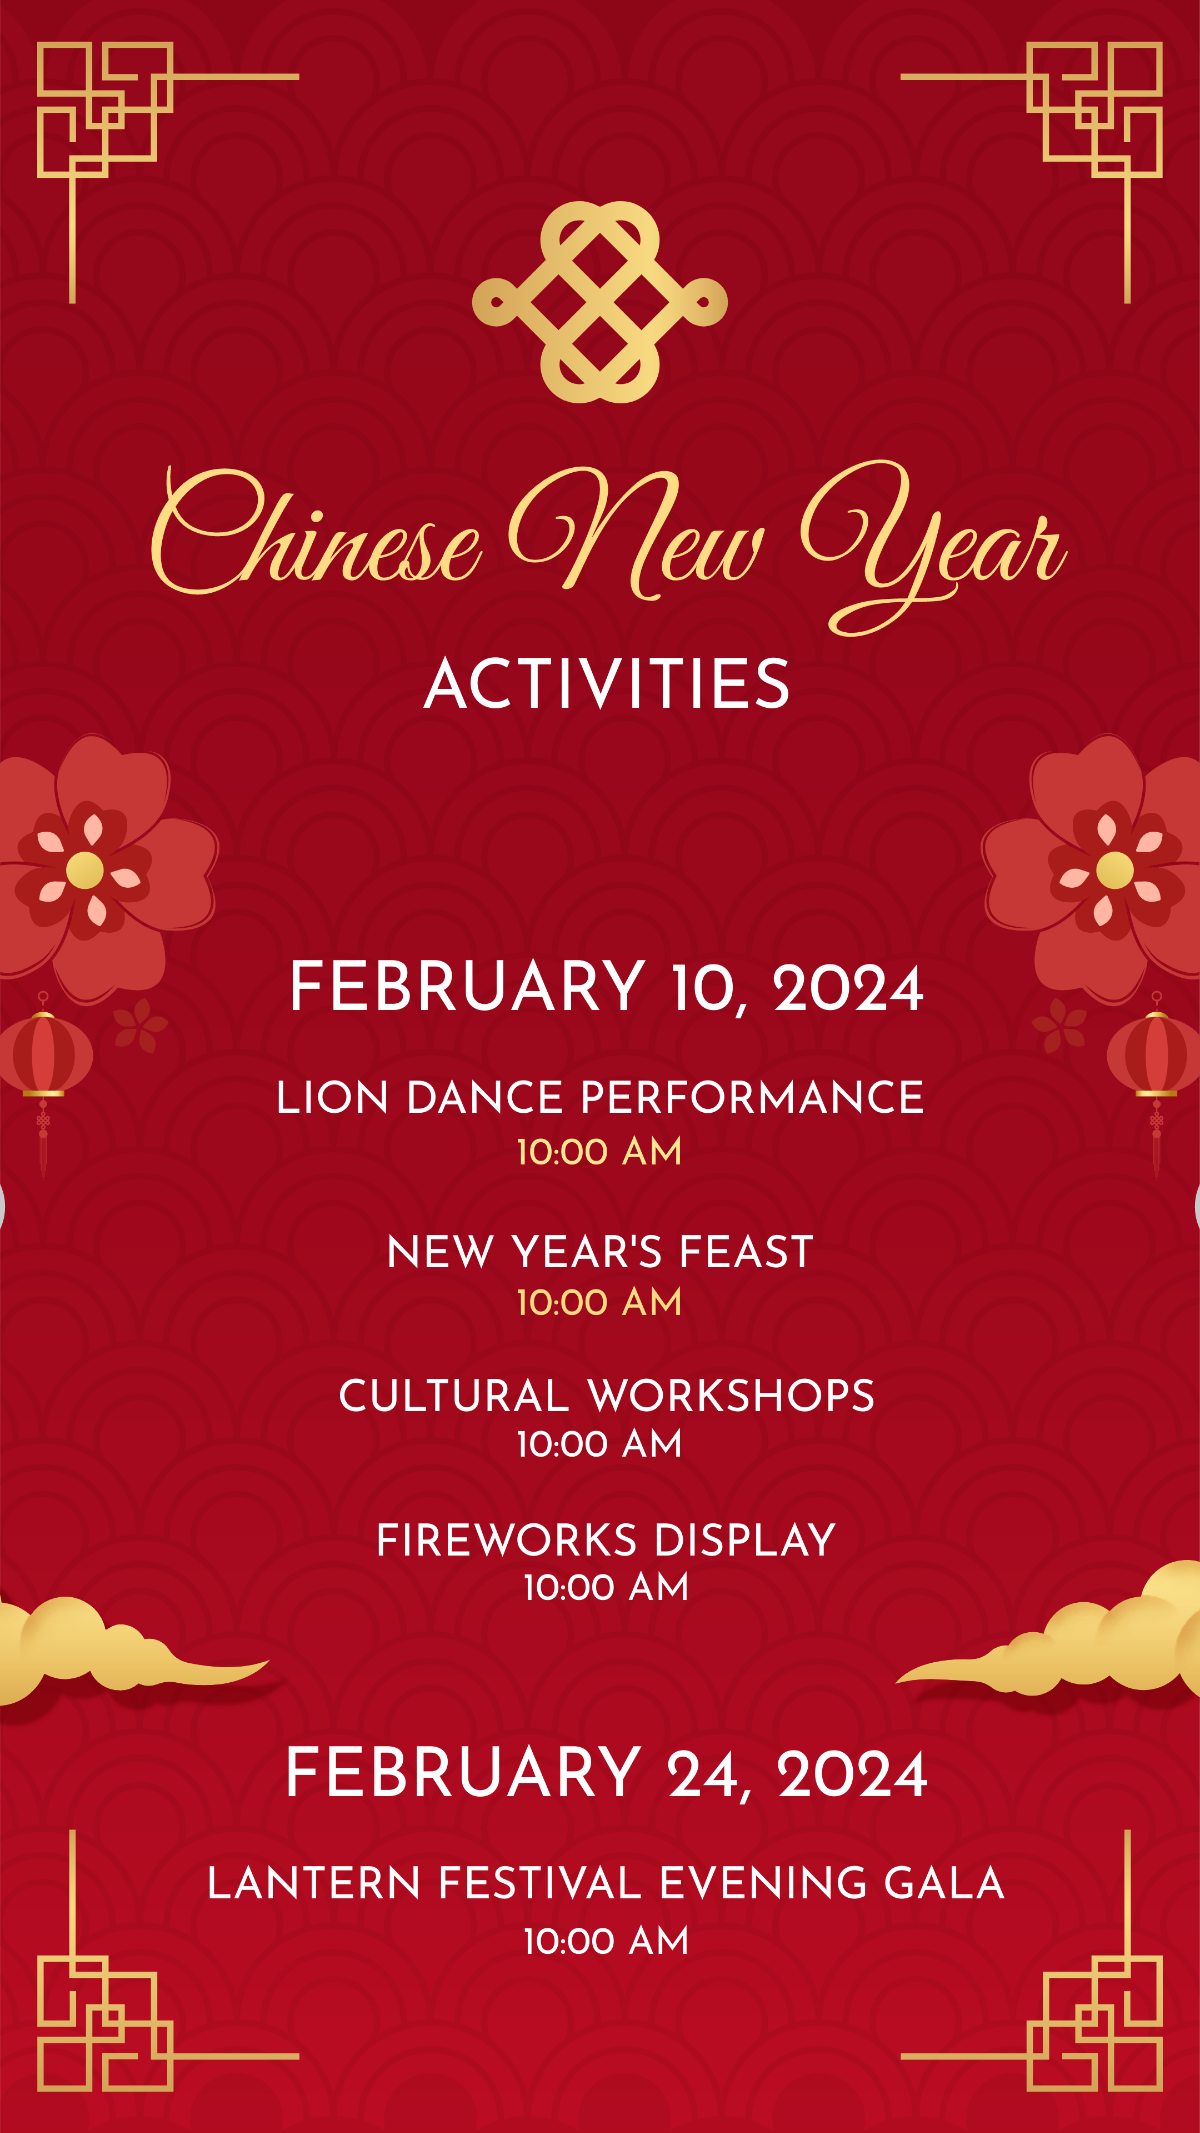 Chinese New Year Celebration Activities Template